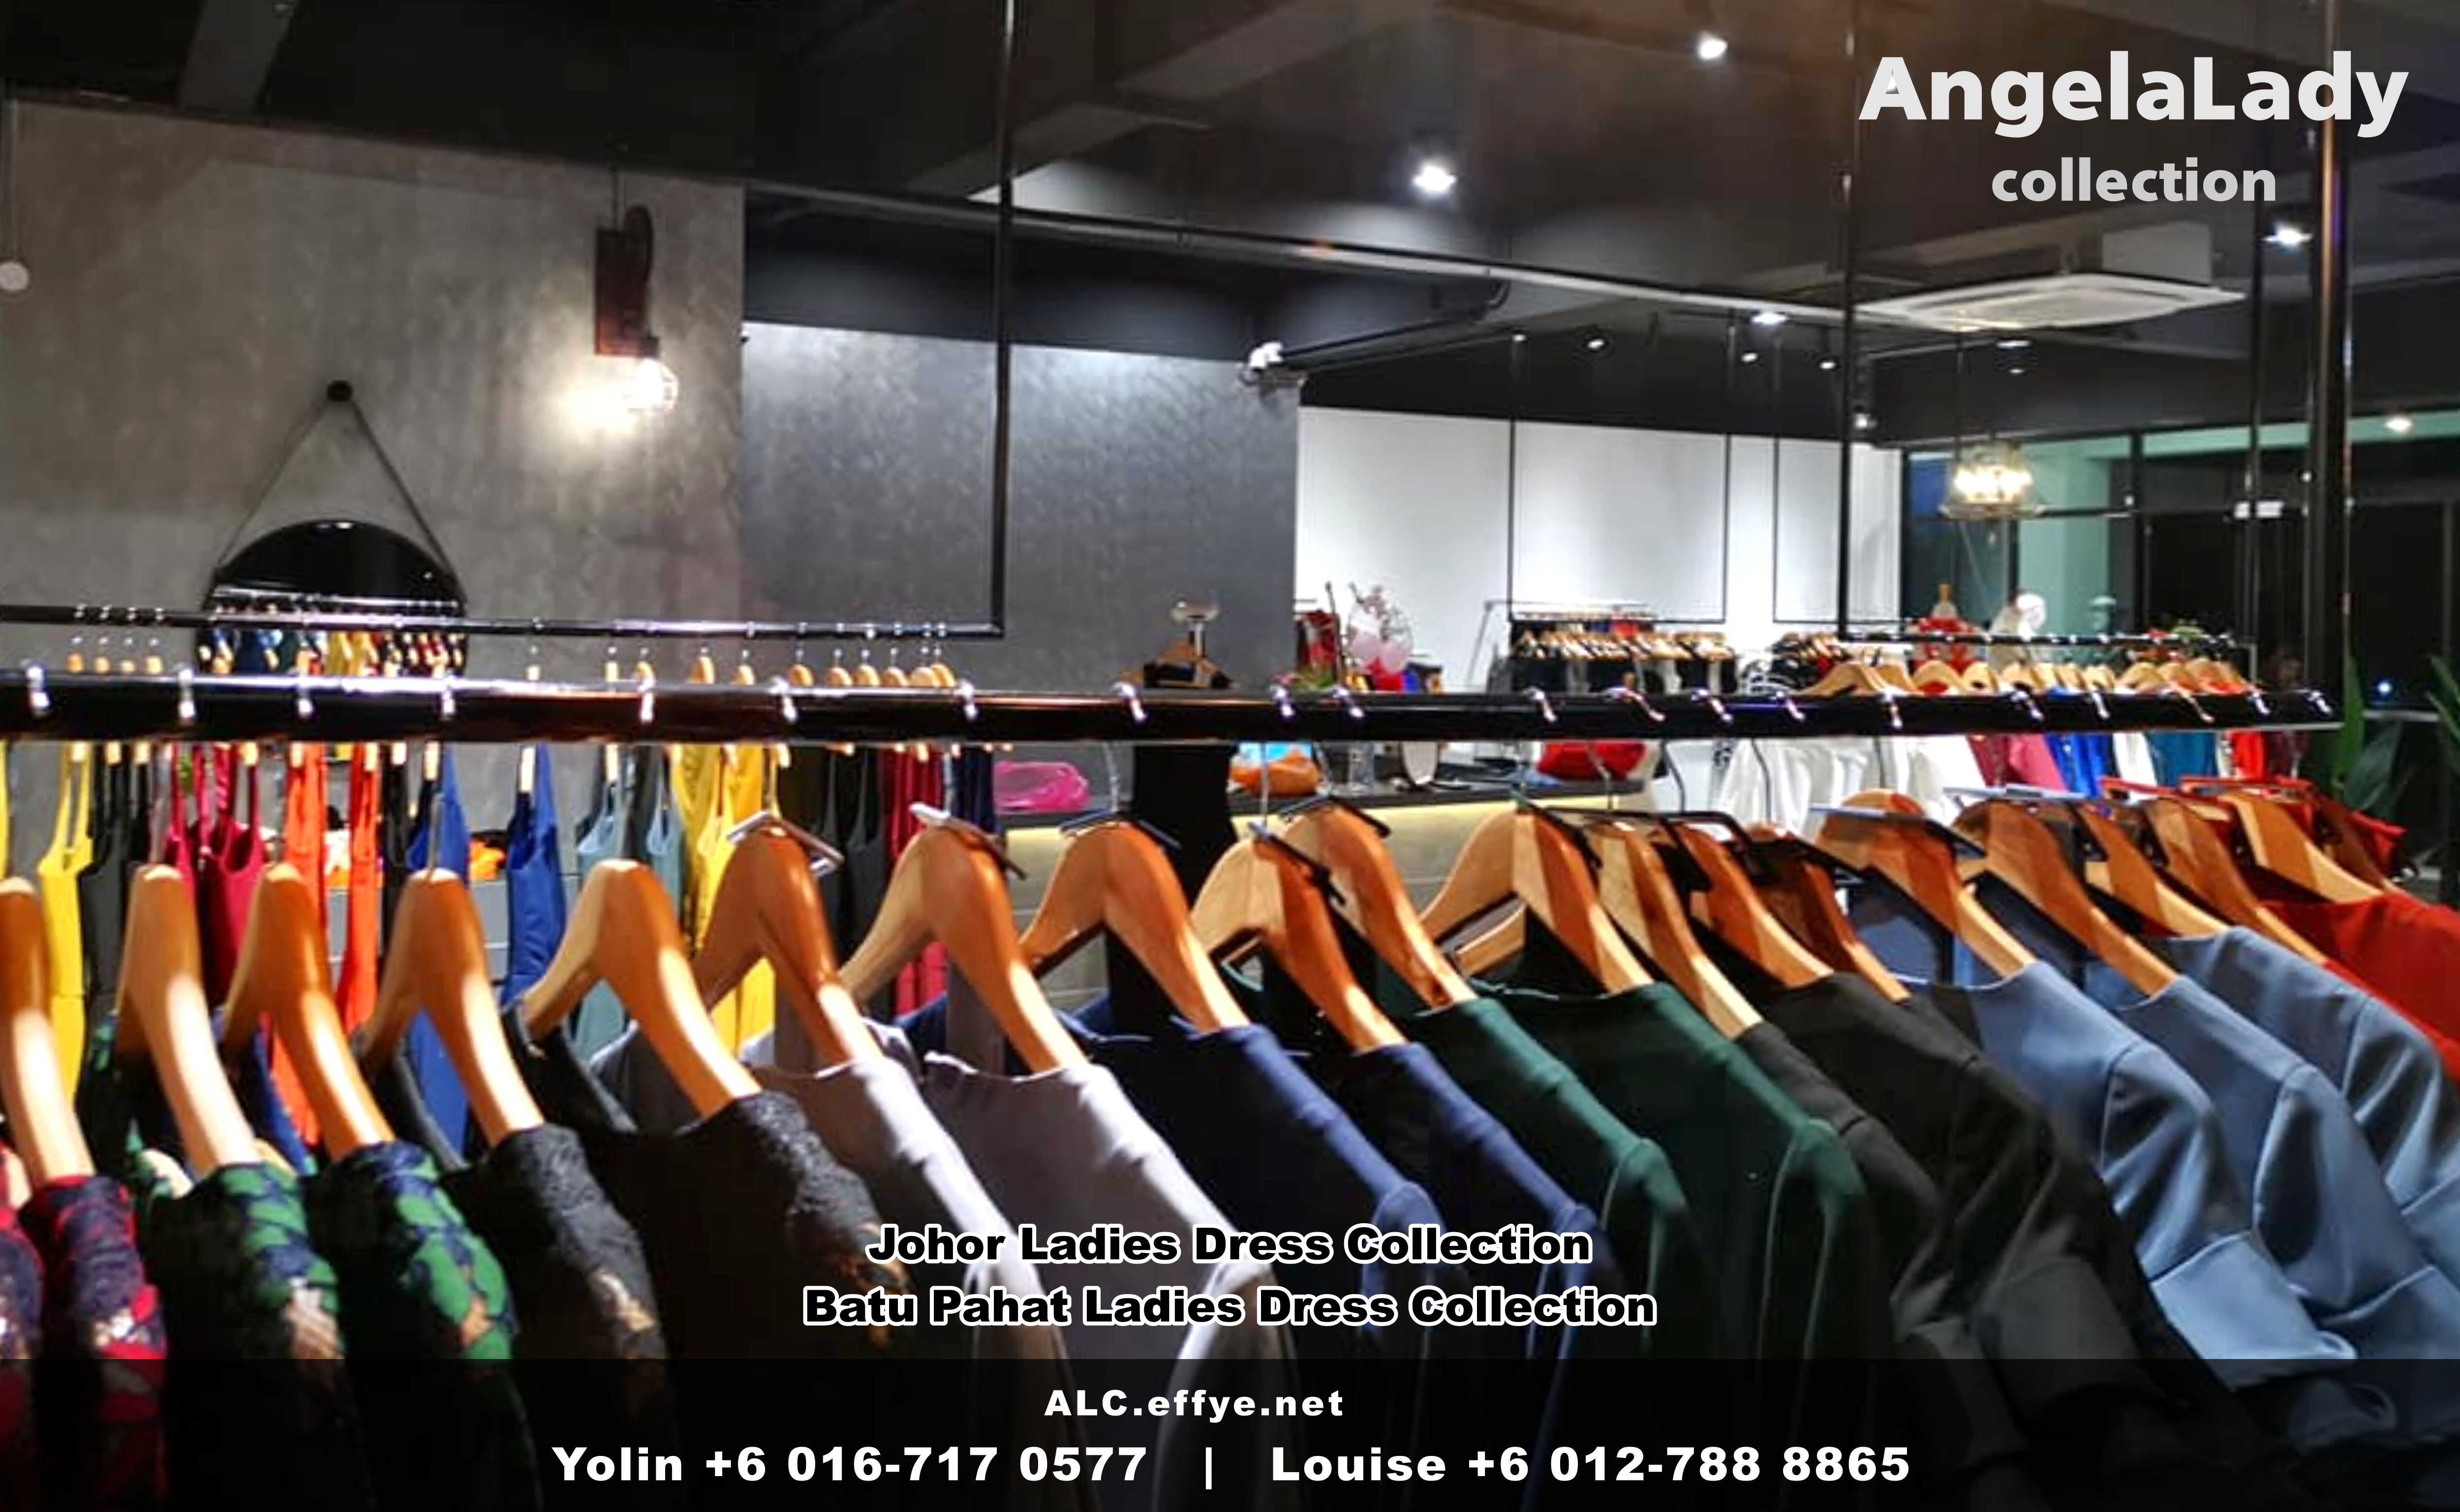 Johor Batu Pahat Ladies Dress Boutique Angela Lady Collection Dinner Dress Evening Gown Maxi Dress Evening Dress Gown Boutique Fashion Lady Apparel Clothes Jeans Skirt Pants Malaysia A01-009